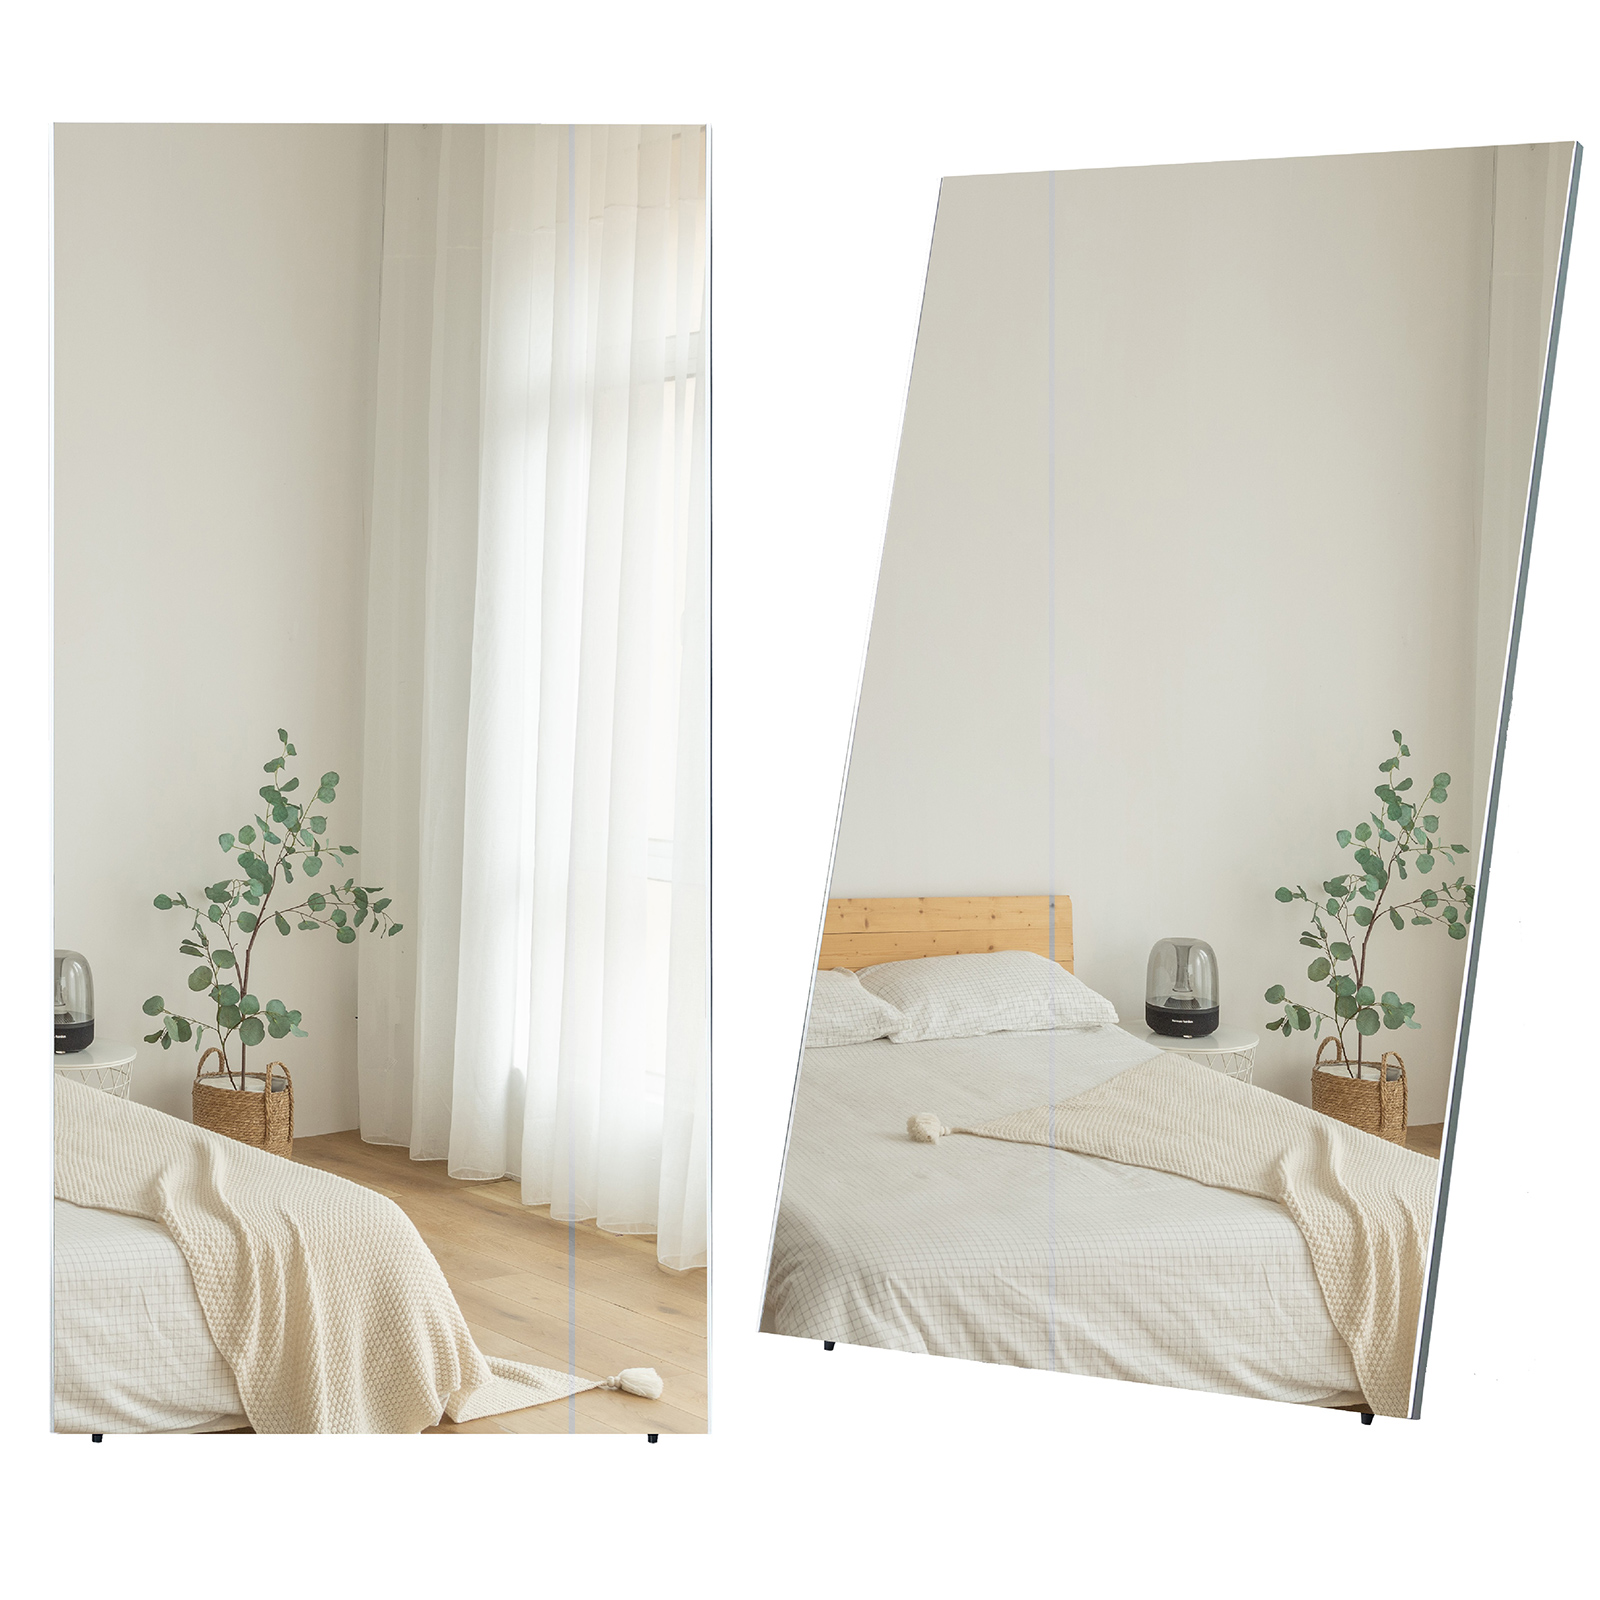 [5 month 18~ first arrival 100 name 1000 jpy Koo po equipped ] Dance mirror break up . not mirror width 100cm looking glass large light weight folding crack not mirror large light weight carrying film mirror 